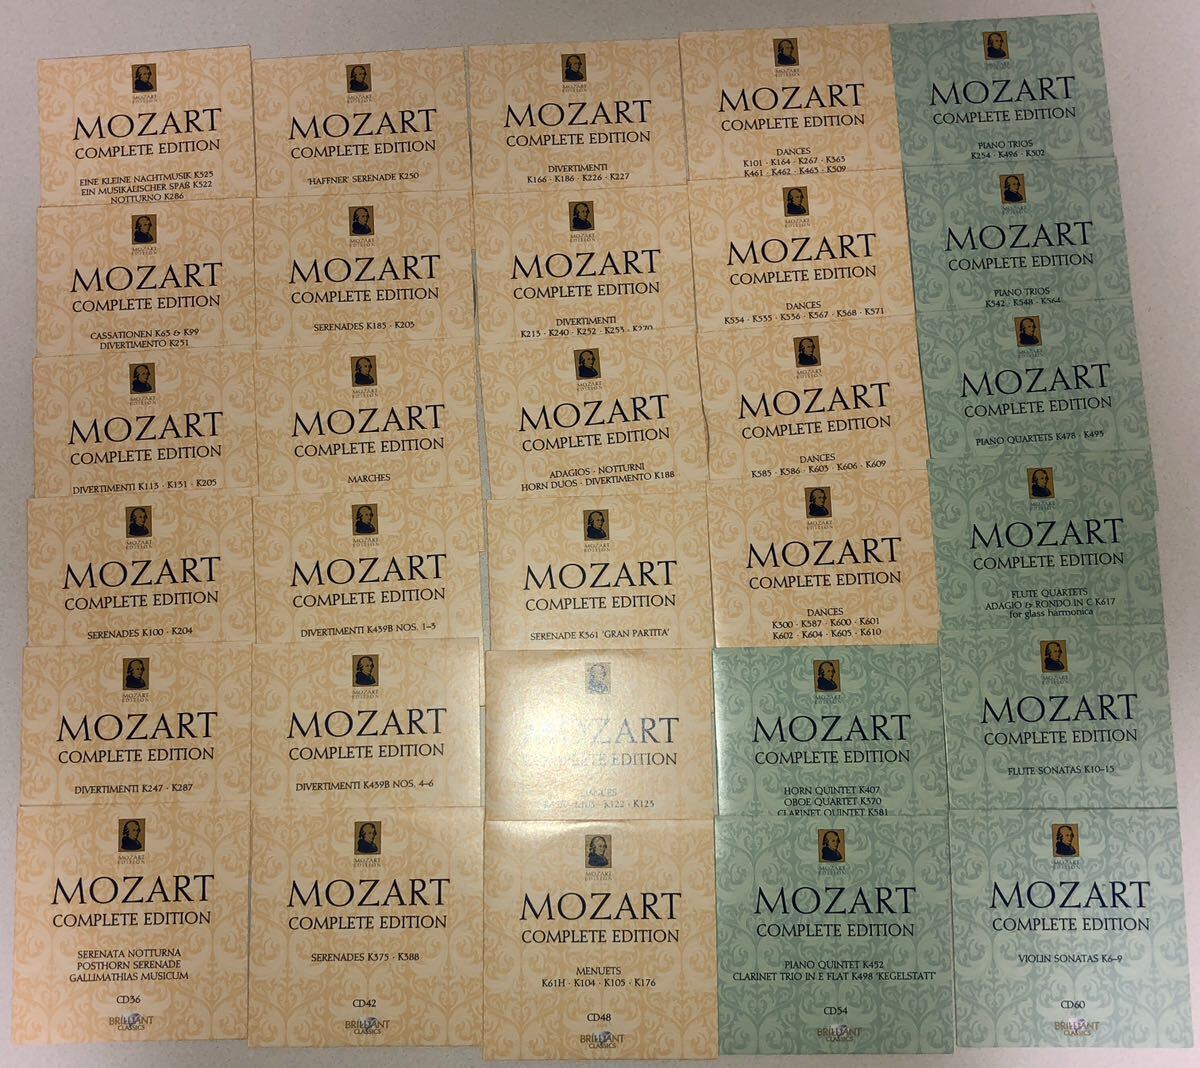 MOZART COMPLETE EDITION Complete Works on CD (170 CD + CD-ROM)ブリリアント社製 モーツァルト全集の画像6